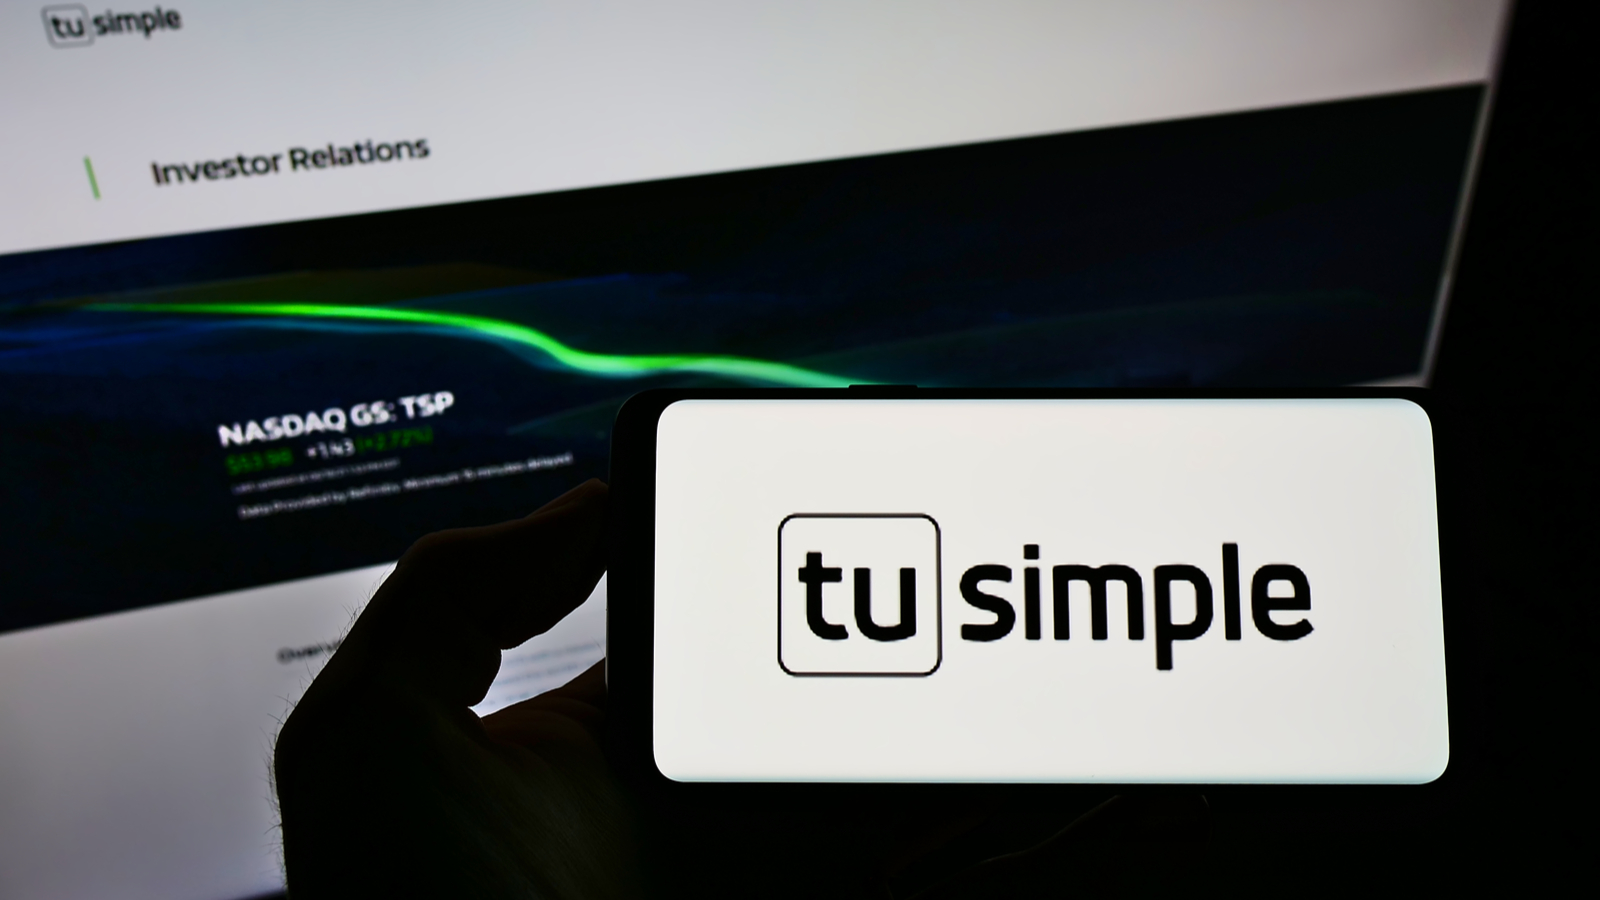 TSP stock: a hand holding a phone displaying the Tusimple logo in front of a computer displaying the company's investor relations page